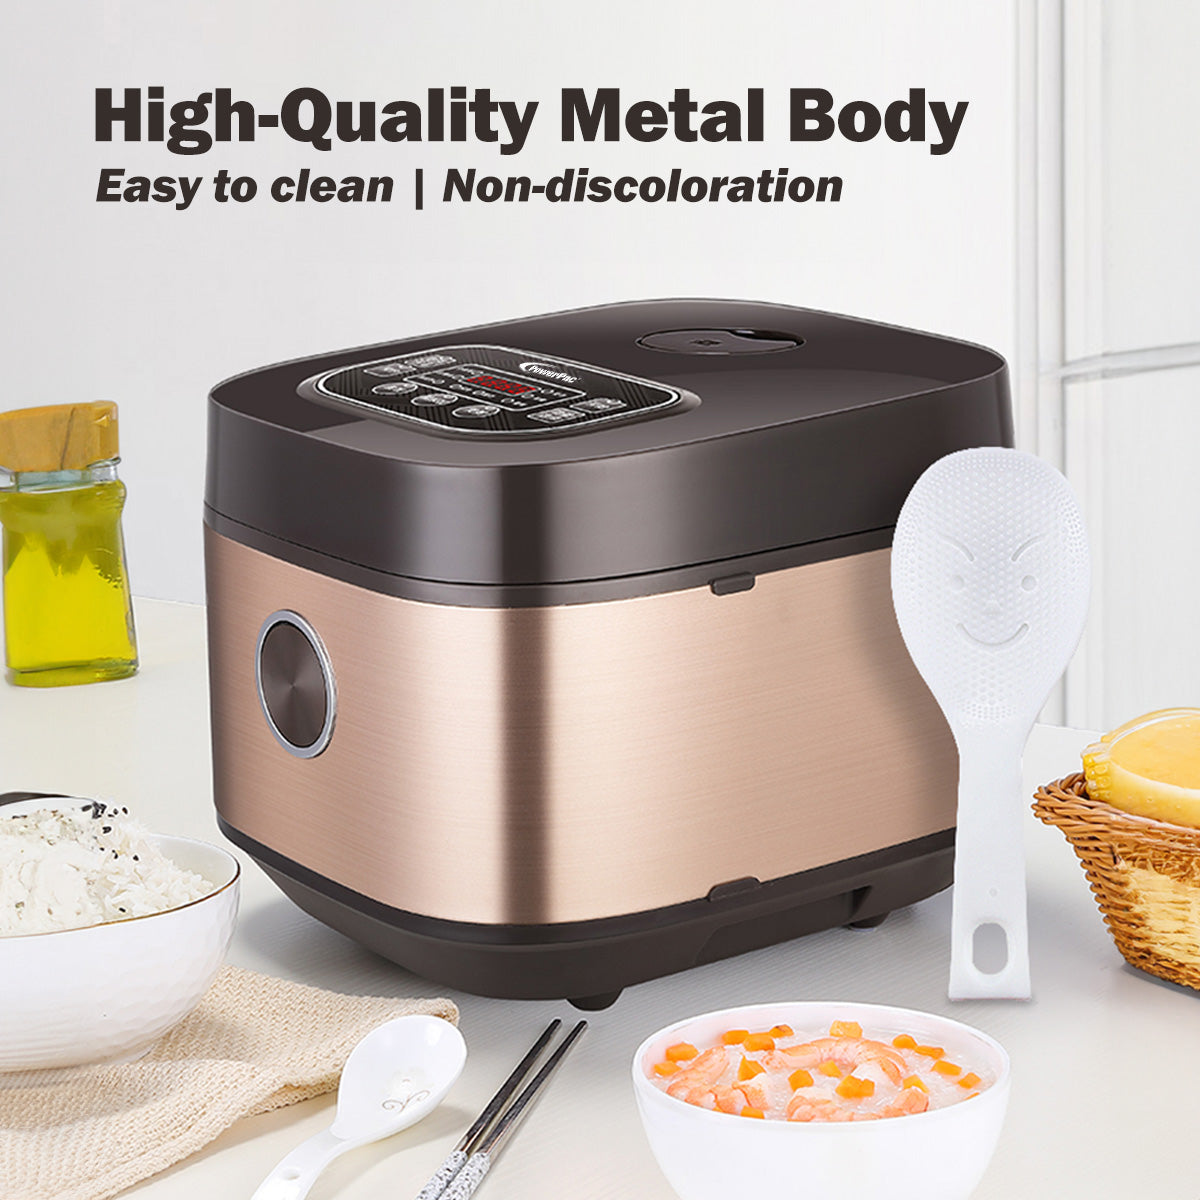 PowerPac Multi-Purpose Digital Rice Cooker 1.8L with Non-stick Inner Pot (PPRC318)